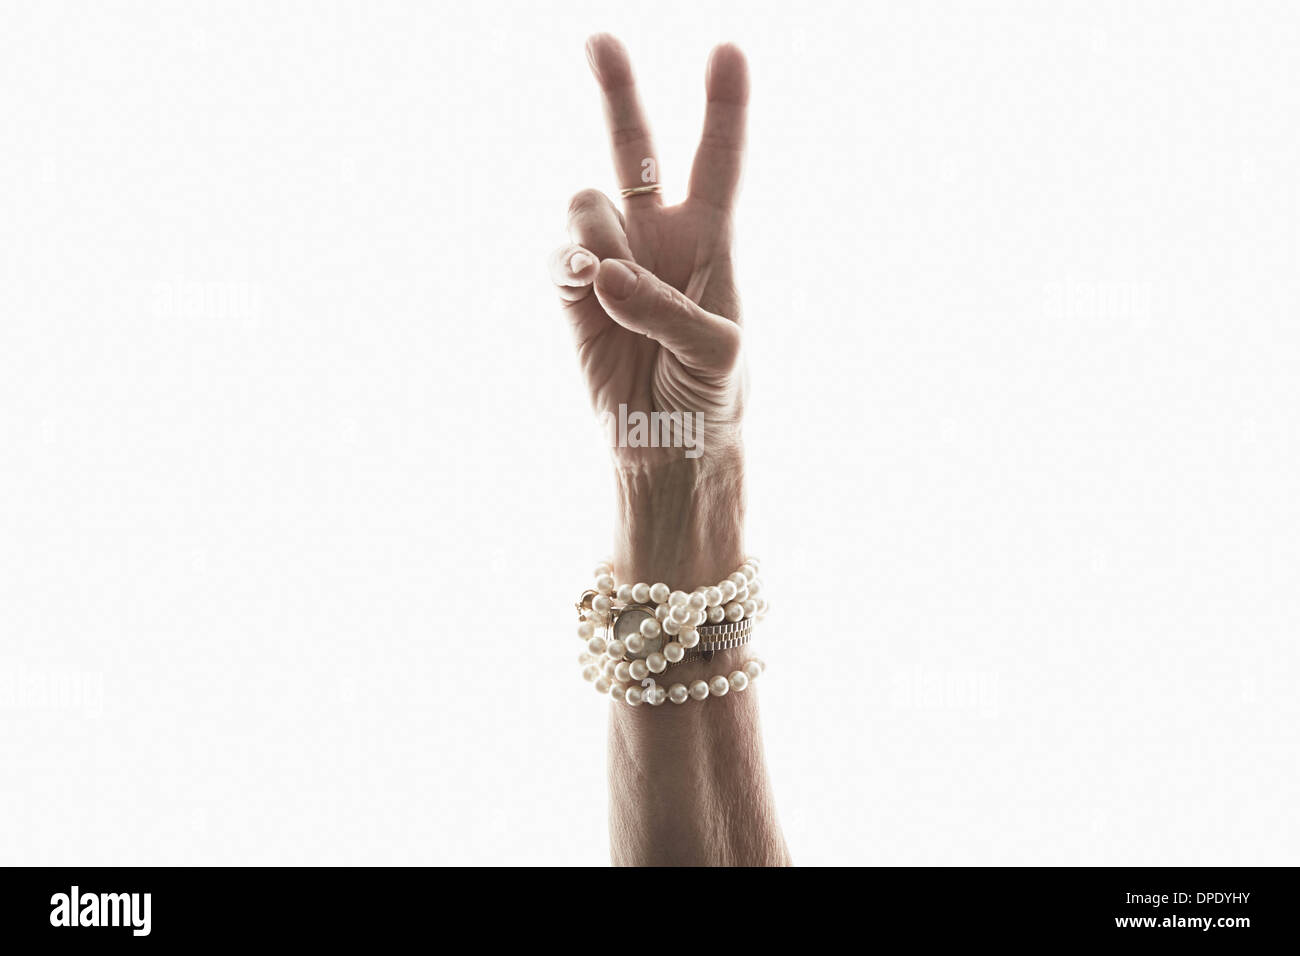 Studio shot of young woman's hand making peace geste Banque D'Images